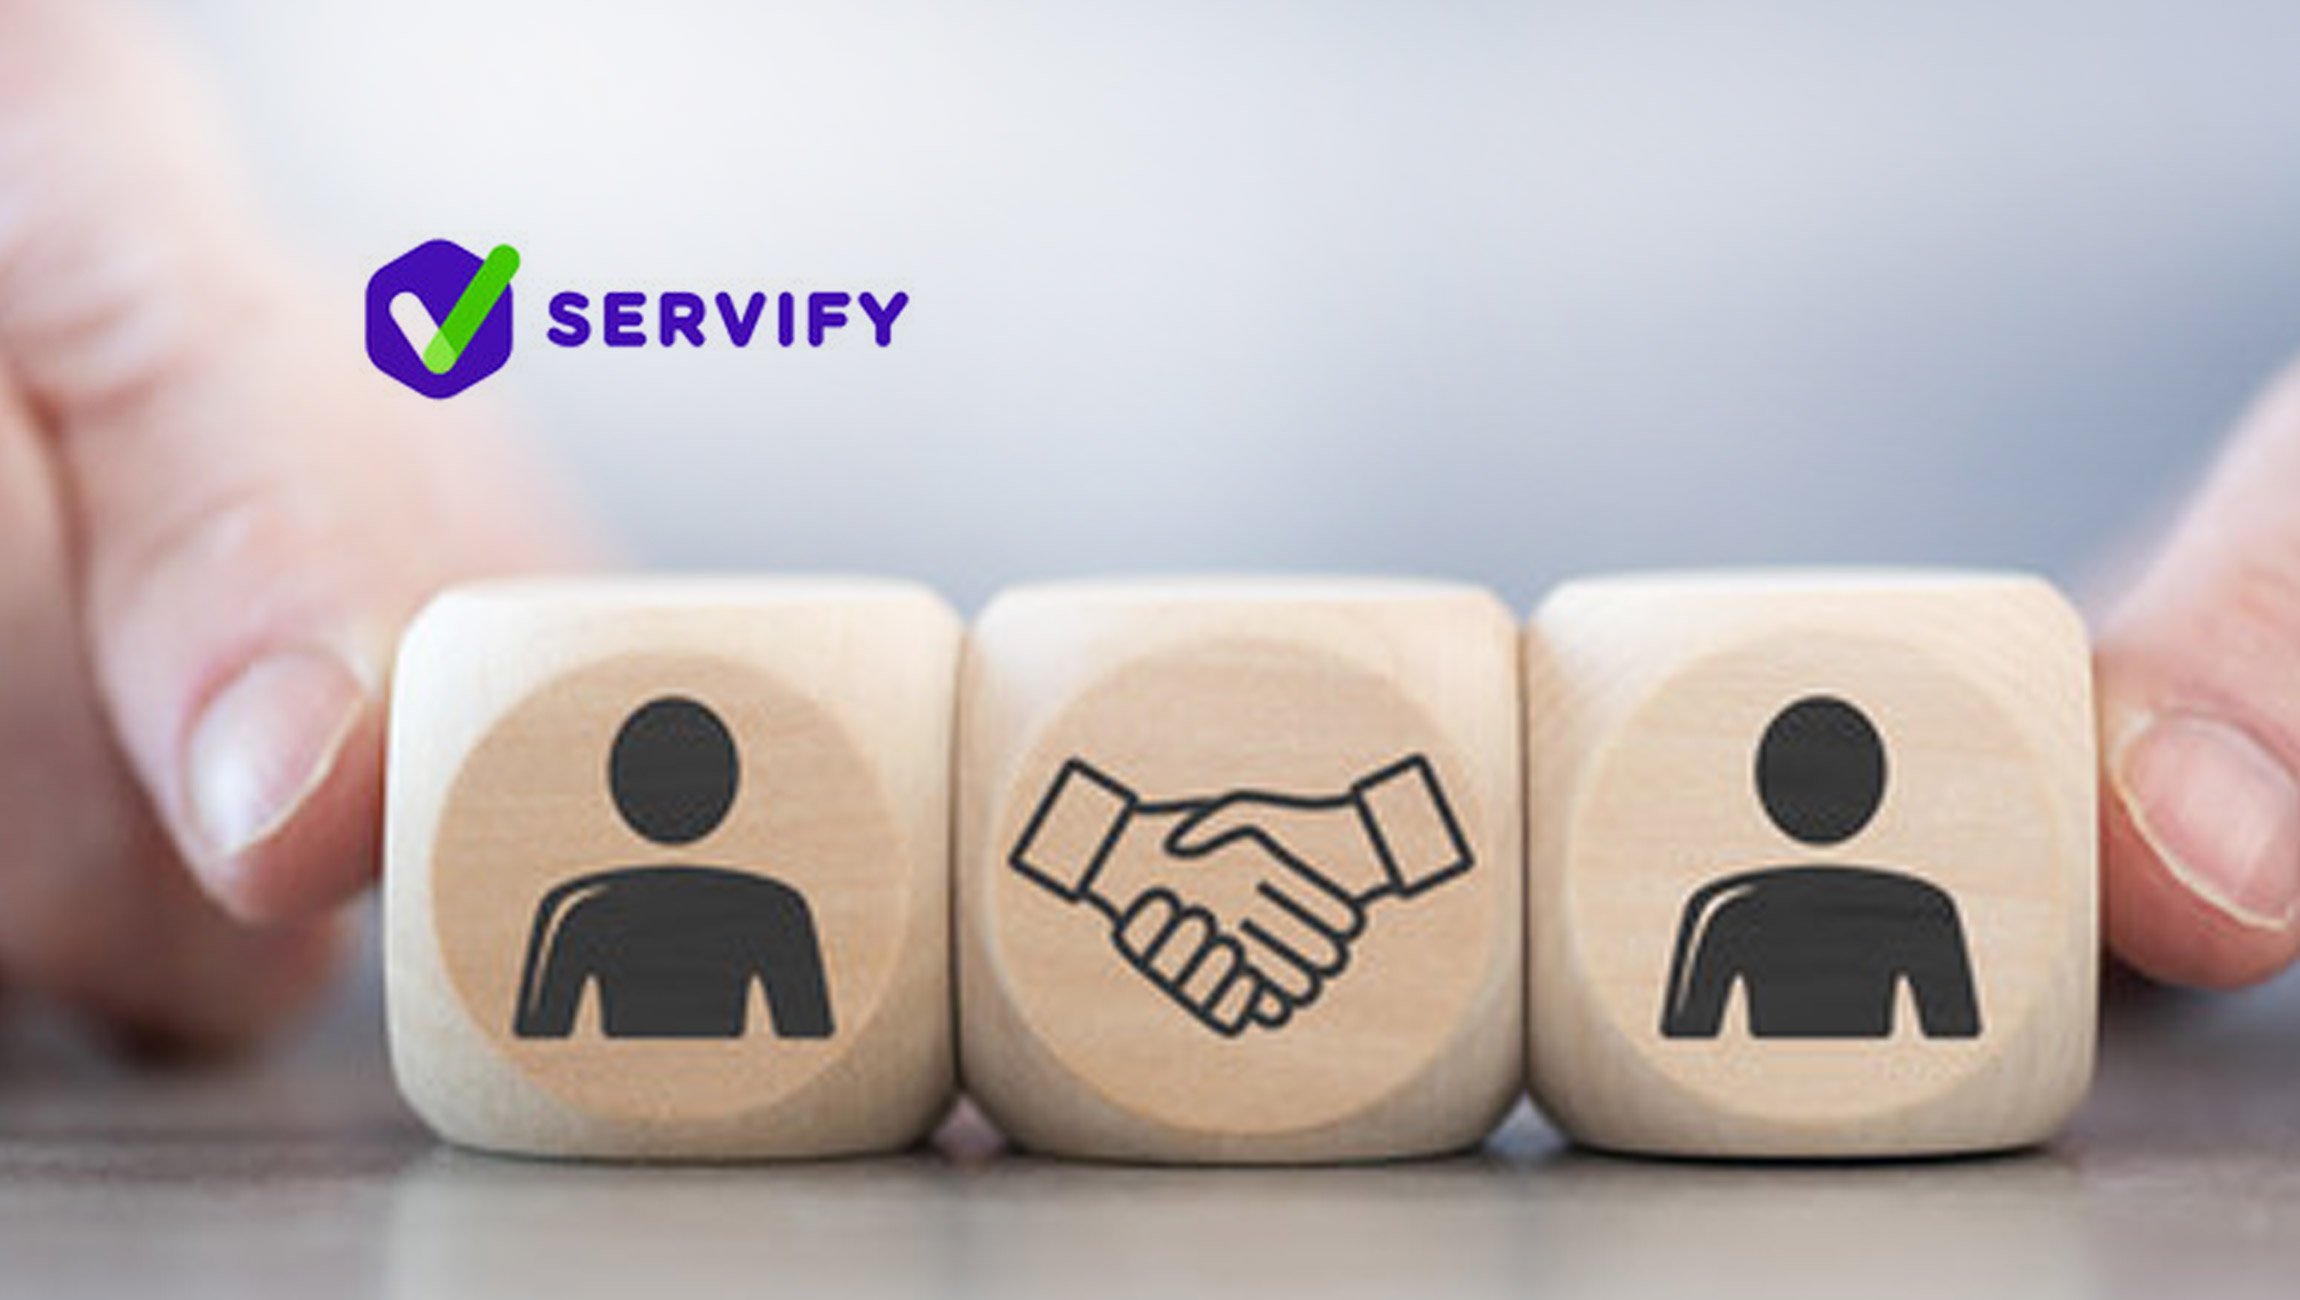 Servify Acquires 247around, an At-Home Service Platform Specialising in Connecting Consumers with OEMs’ Service Network